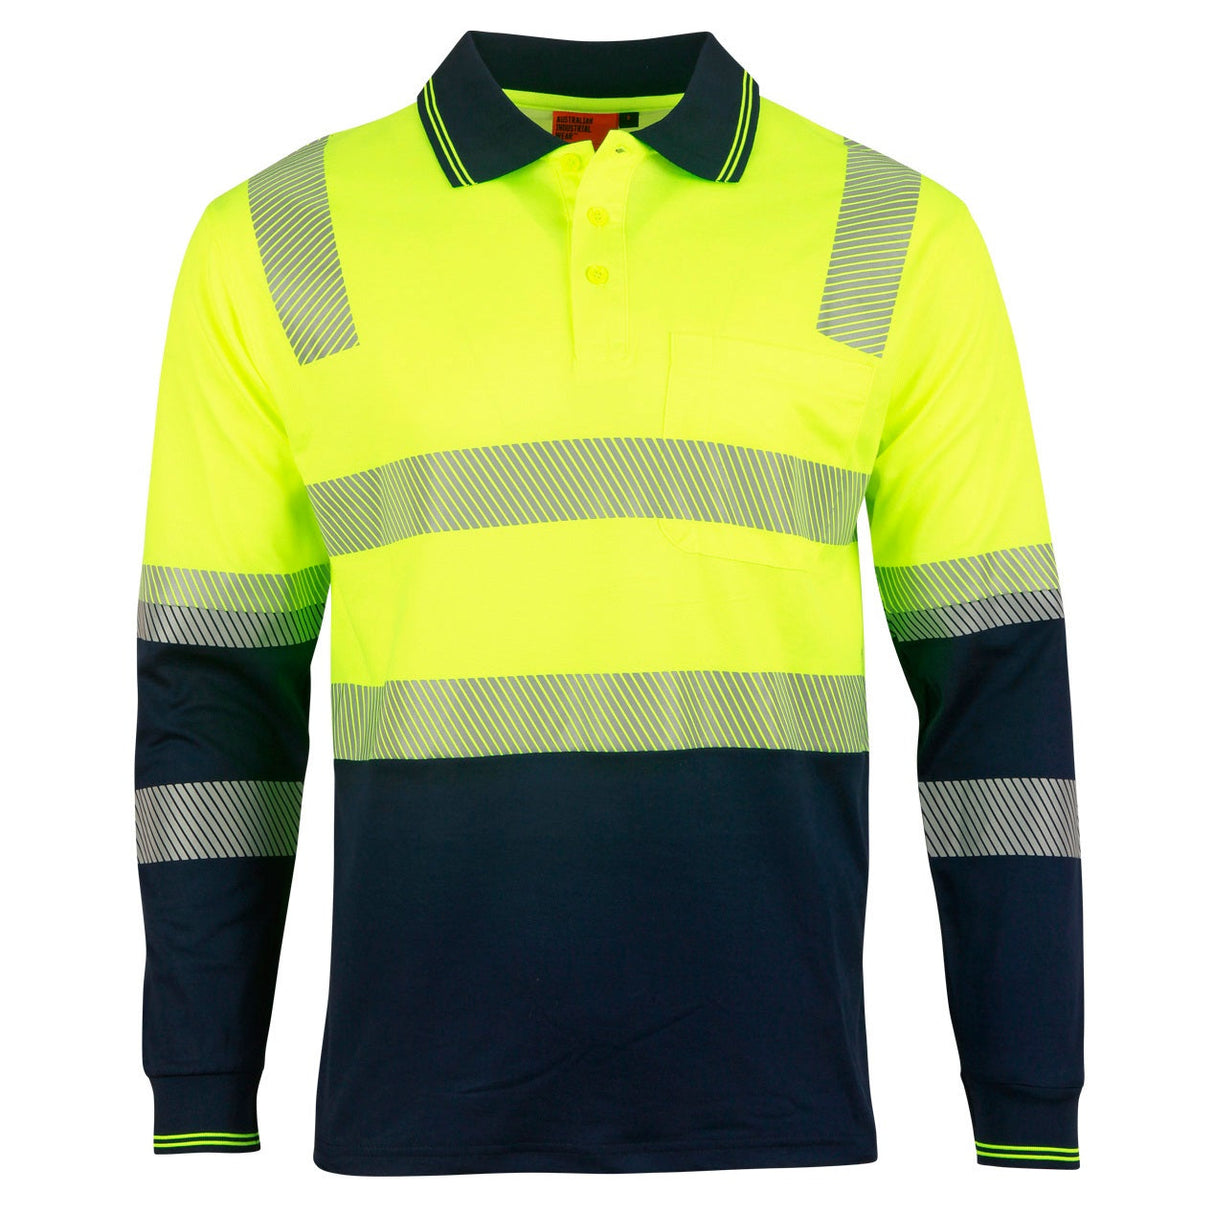 SW74 Unisex Truedry® Biomotion Segmented L/S Safety Polo